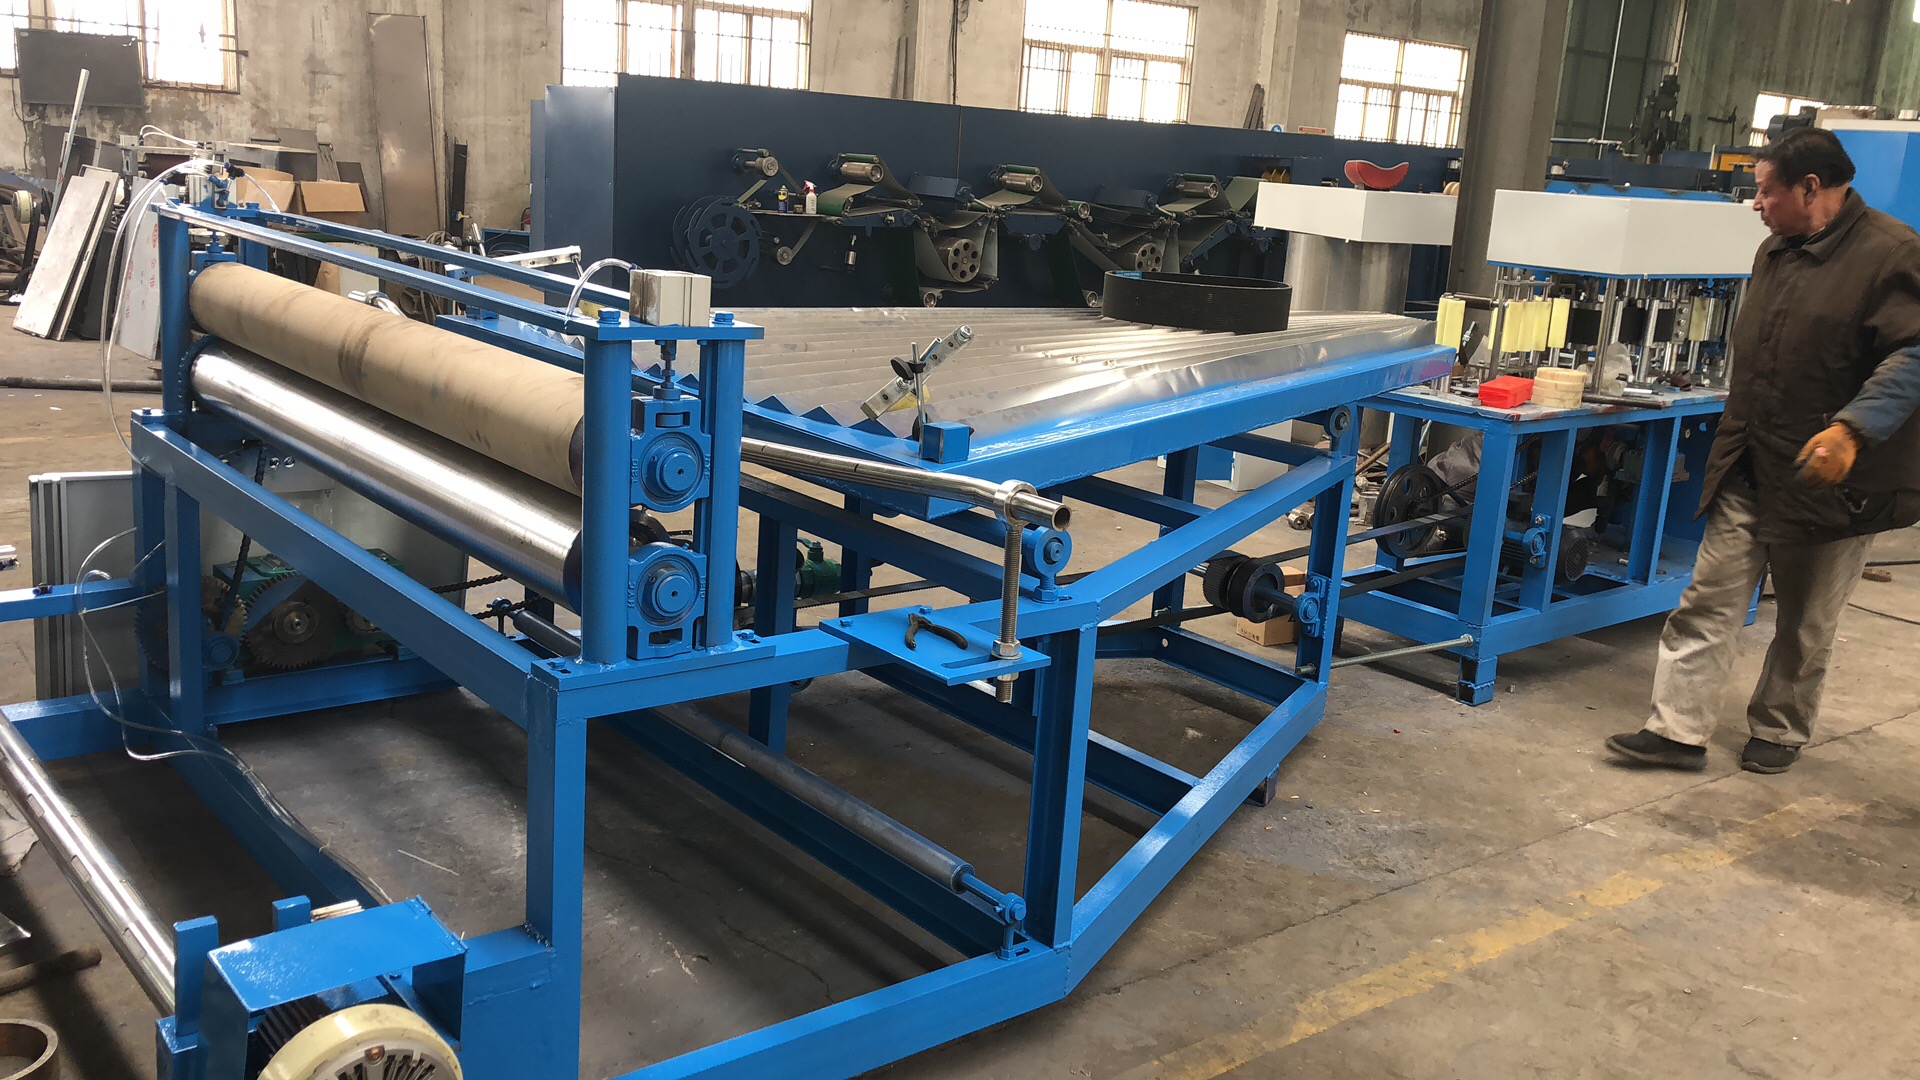 Production process and equipment configuration of first-aid blanket folding machine